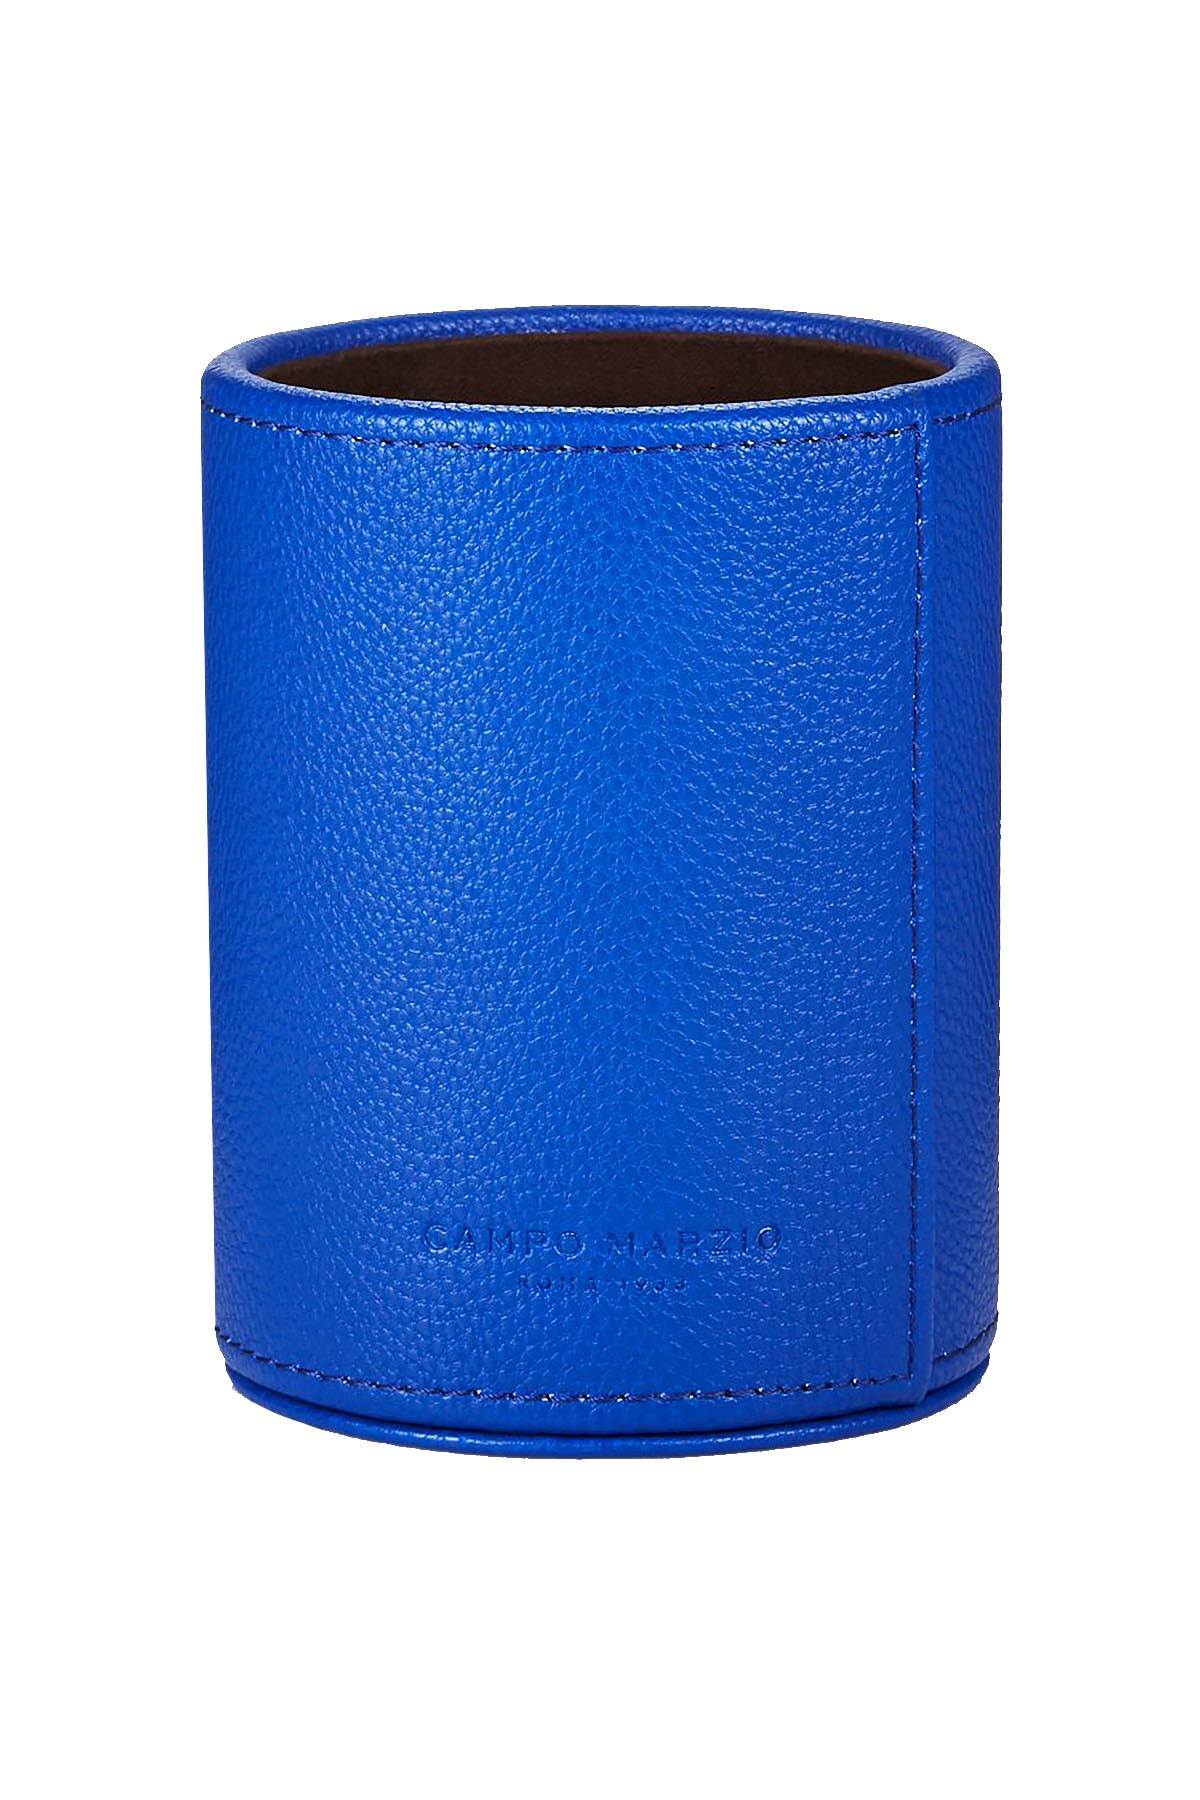 Campo Marzio Blueberry Round Pebbled-Faux-Leather Pen Holder